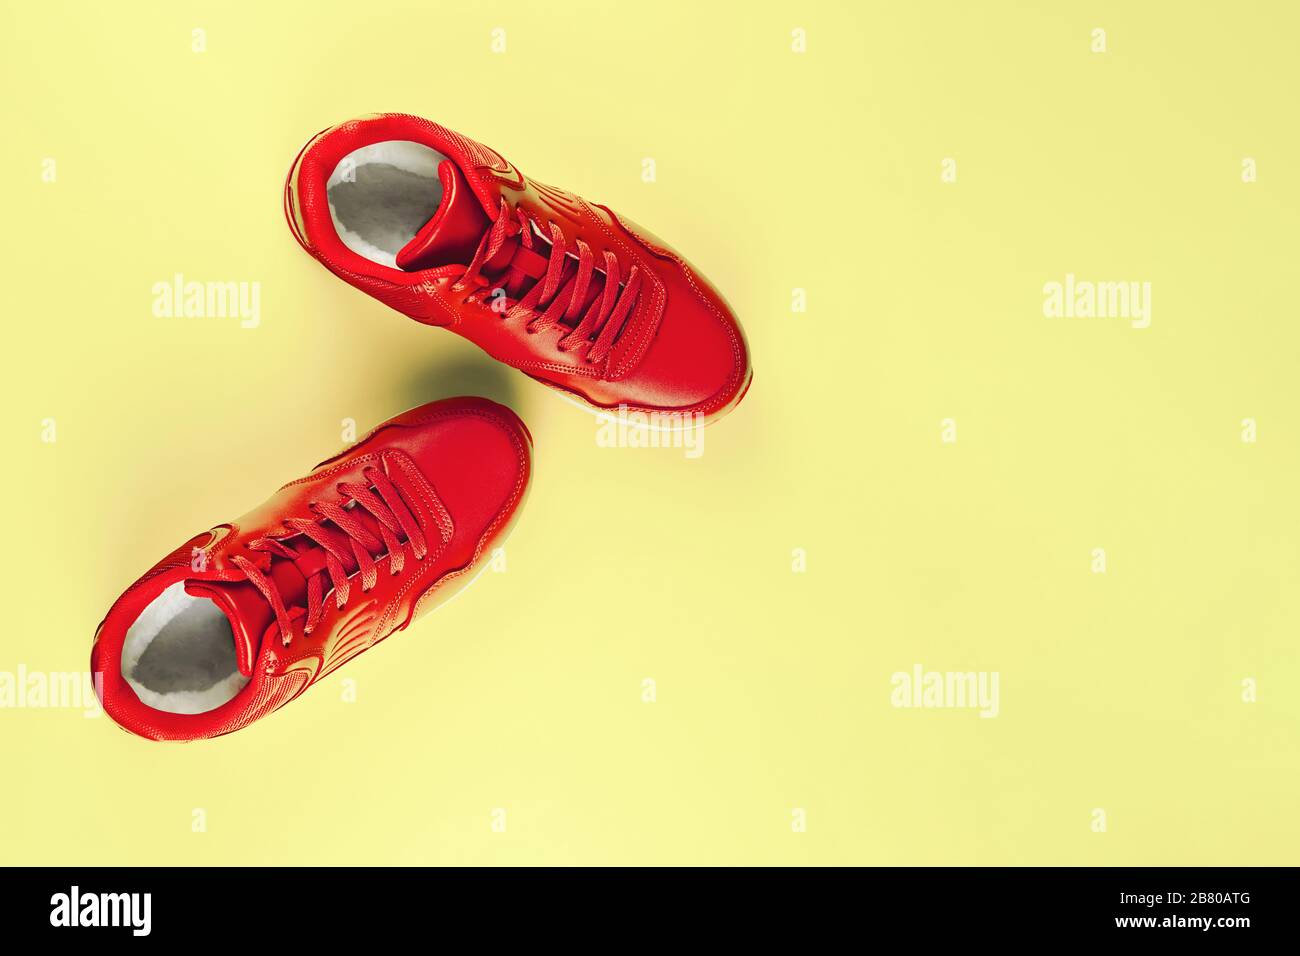 Red sneakers on pastel yellow background. Concept of sport and healthy lifestyle. Place for text, flat lay, top view, vertical. Stock Photo